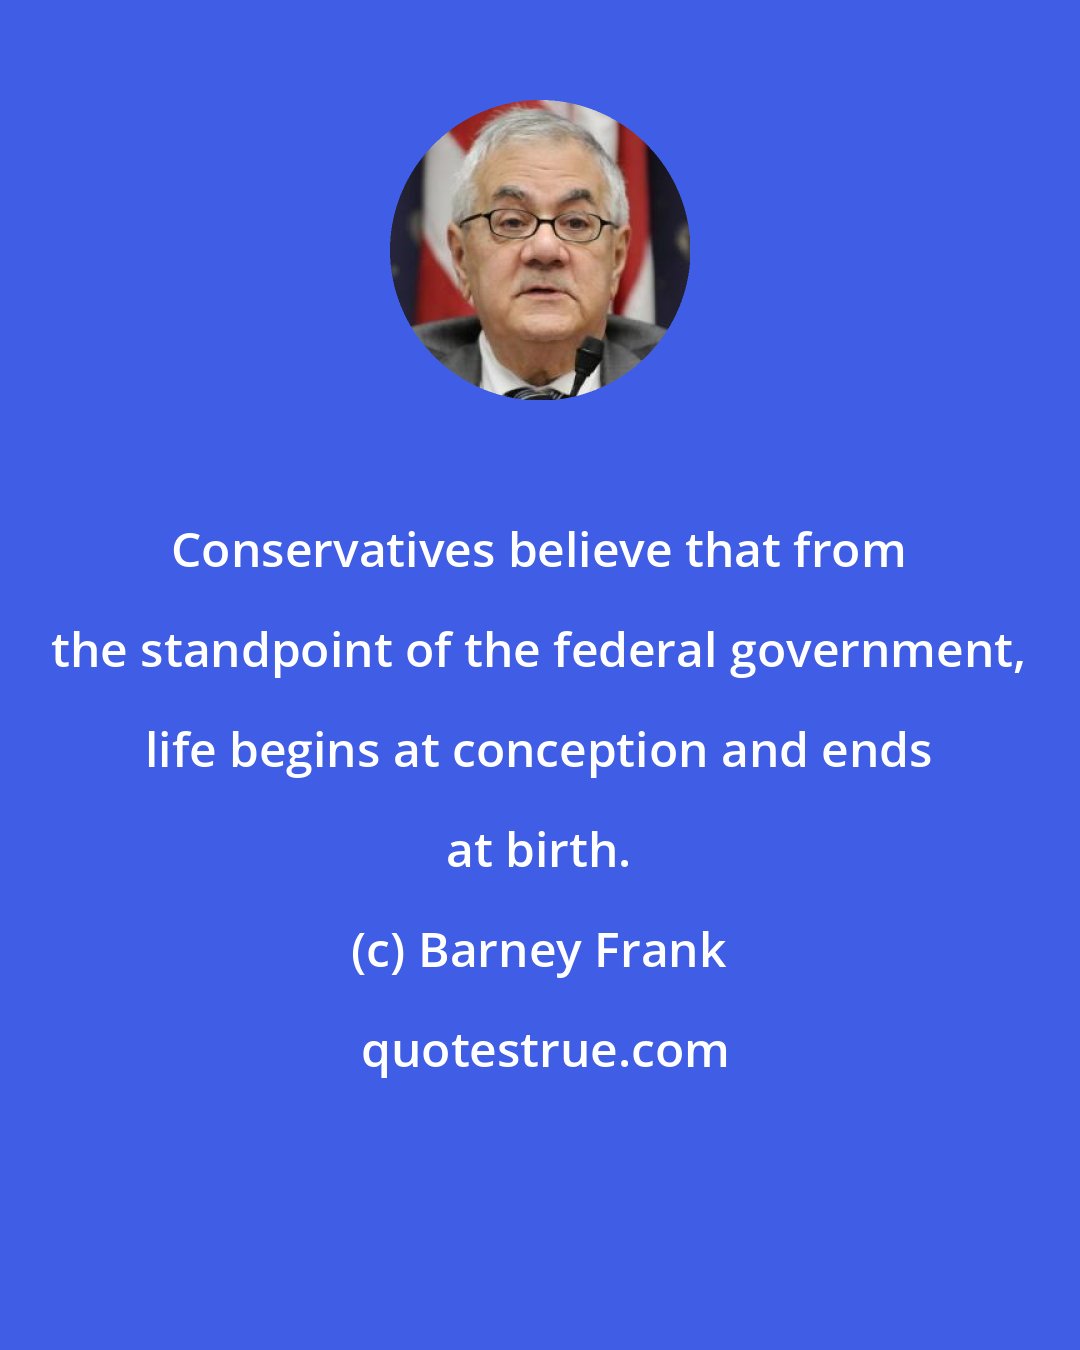 Barney Frank: Conservatives believe that from the standpoint of the federal government, life begins at conception and ends at birth.